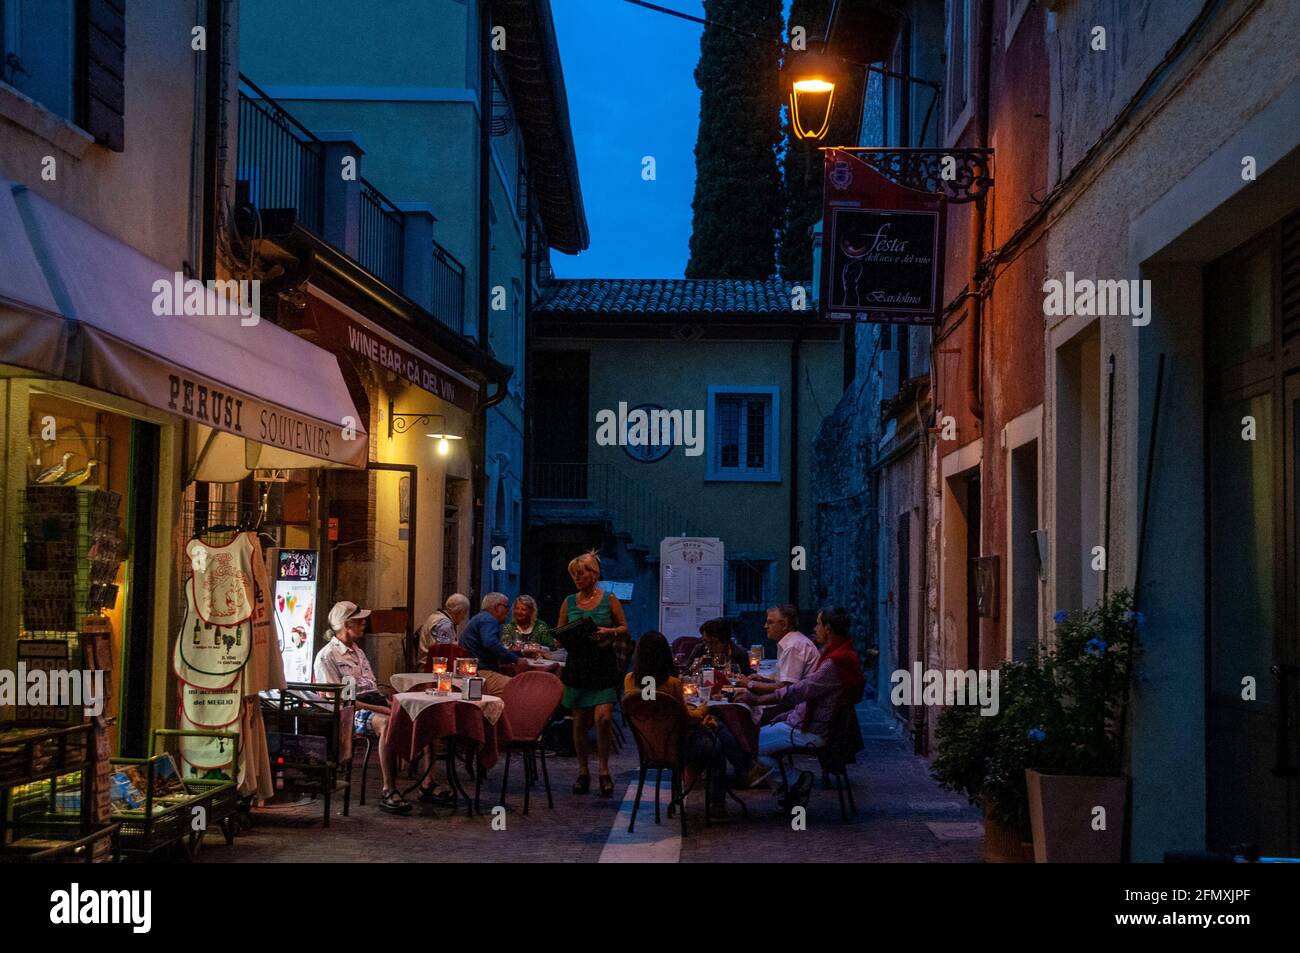 A mix of drinkers and diners sitting at a bistro, lit by street lamps in the early evening at Bardolino, on the eastern shore of Lake Garda in the Ven Stock Photo